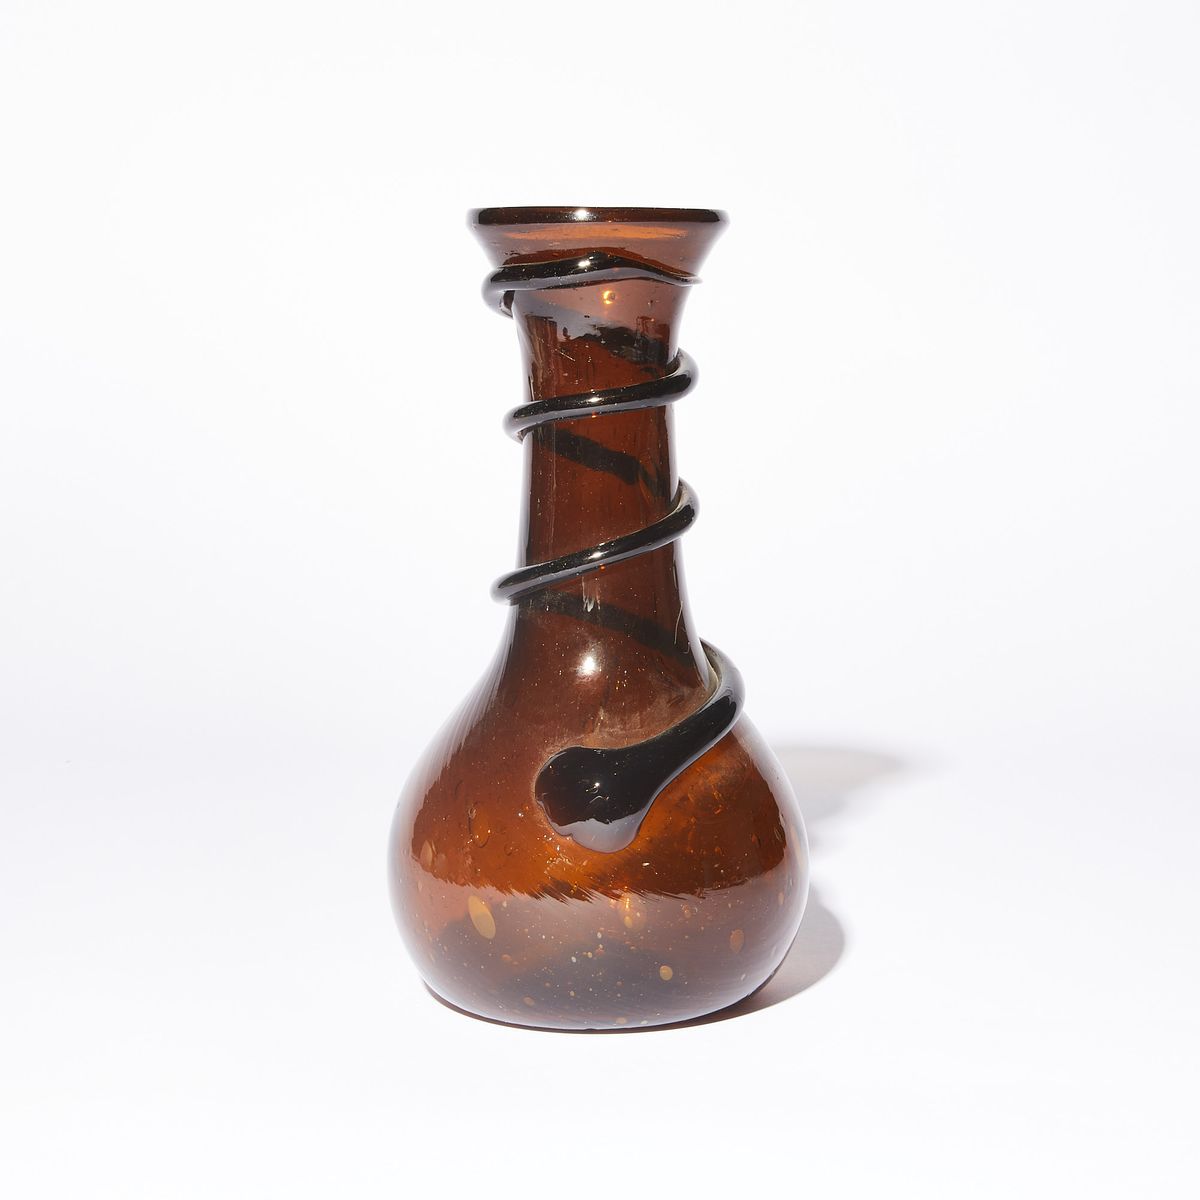 Translucent Brown glass vase with black swirl going up the neck